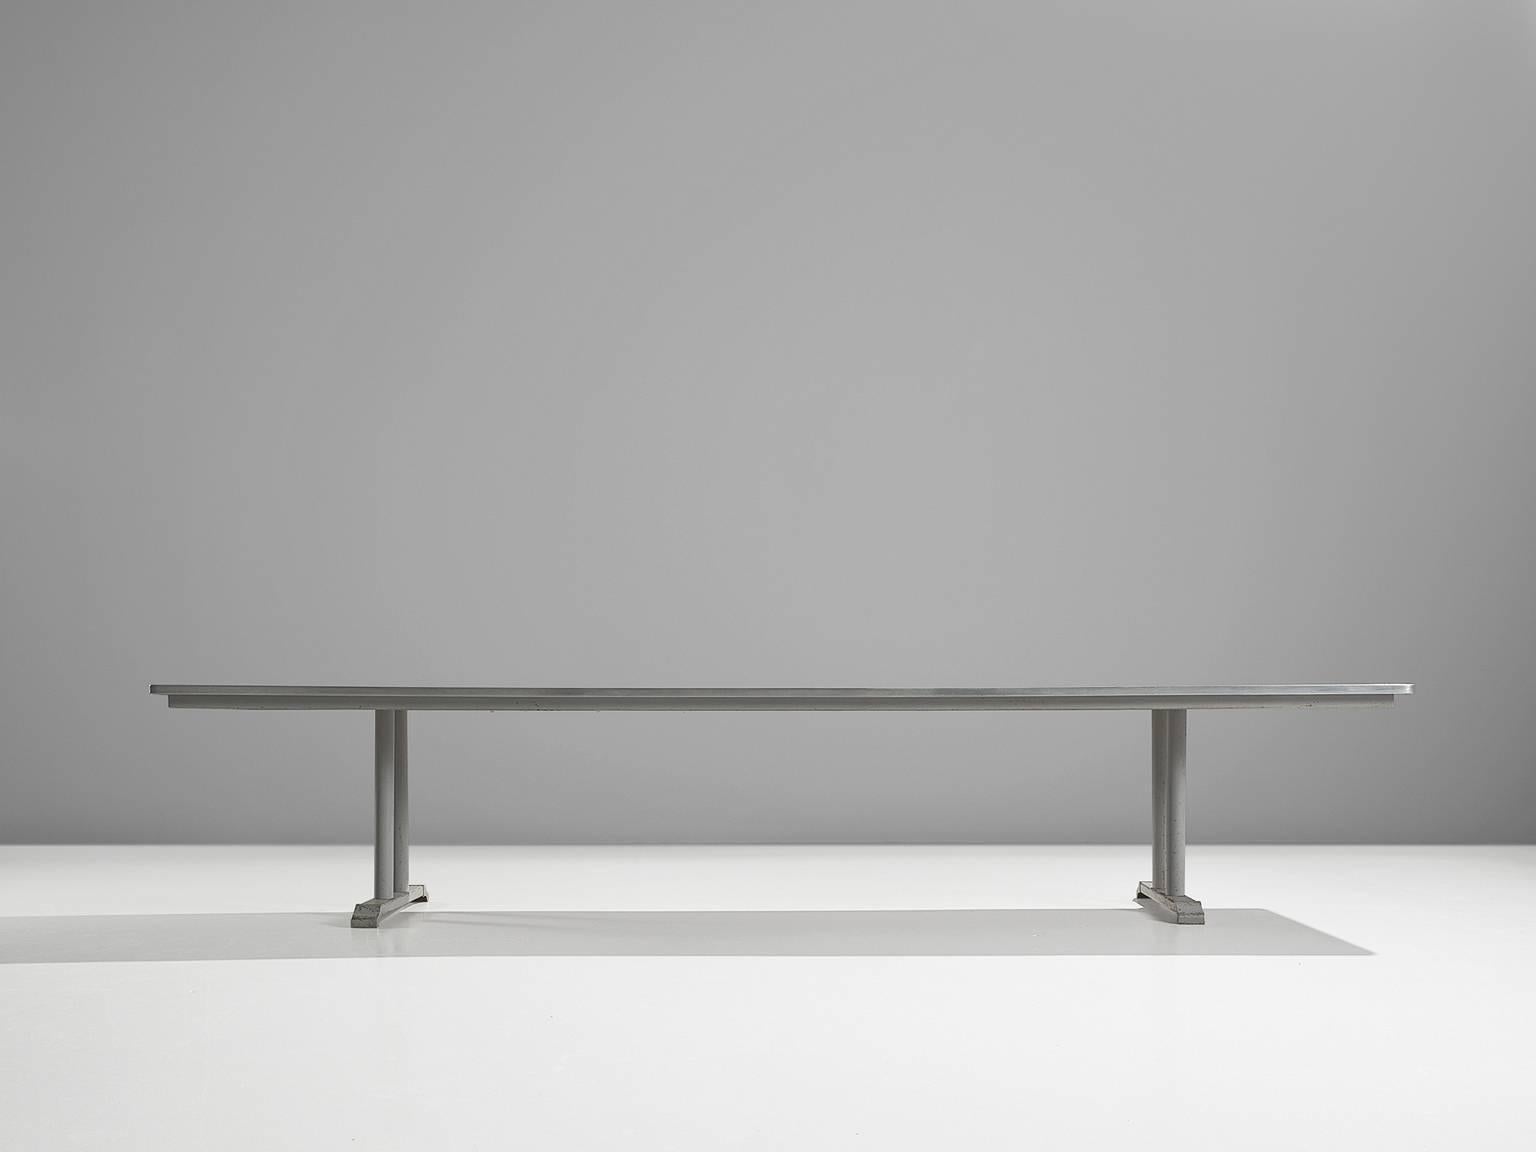 Conference table, linoleum top with aluminium foot, Chris Hoffmann for Gispen, The Netherlands, 1949. 

This four meter long conference table is produced by Gispen (1916-) and designed by Chris Hoffmann. The table features two trestle bases legs.